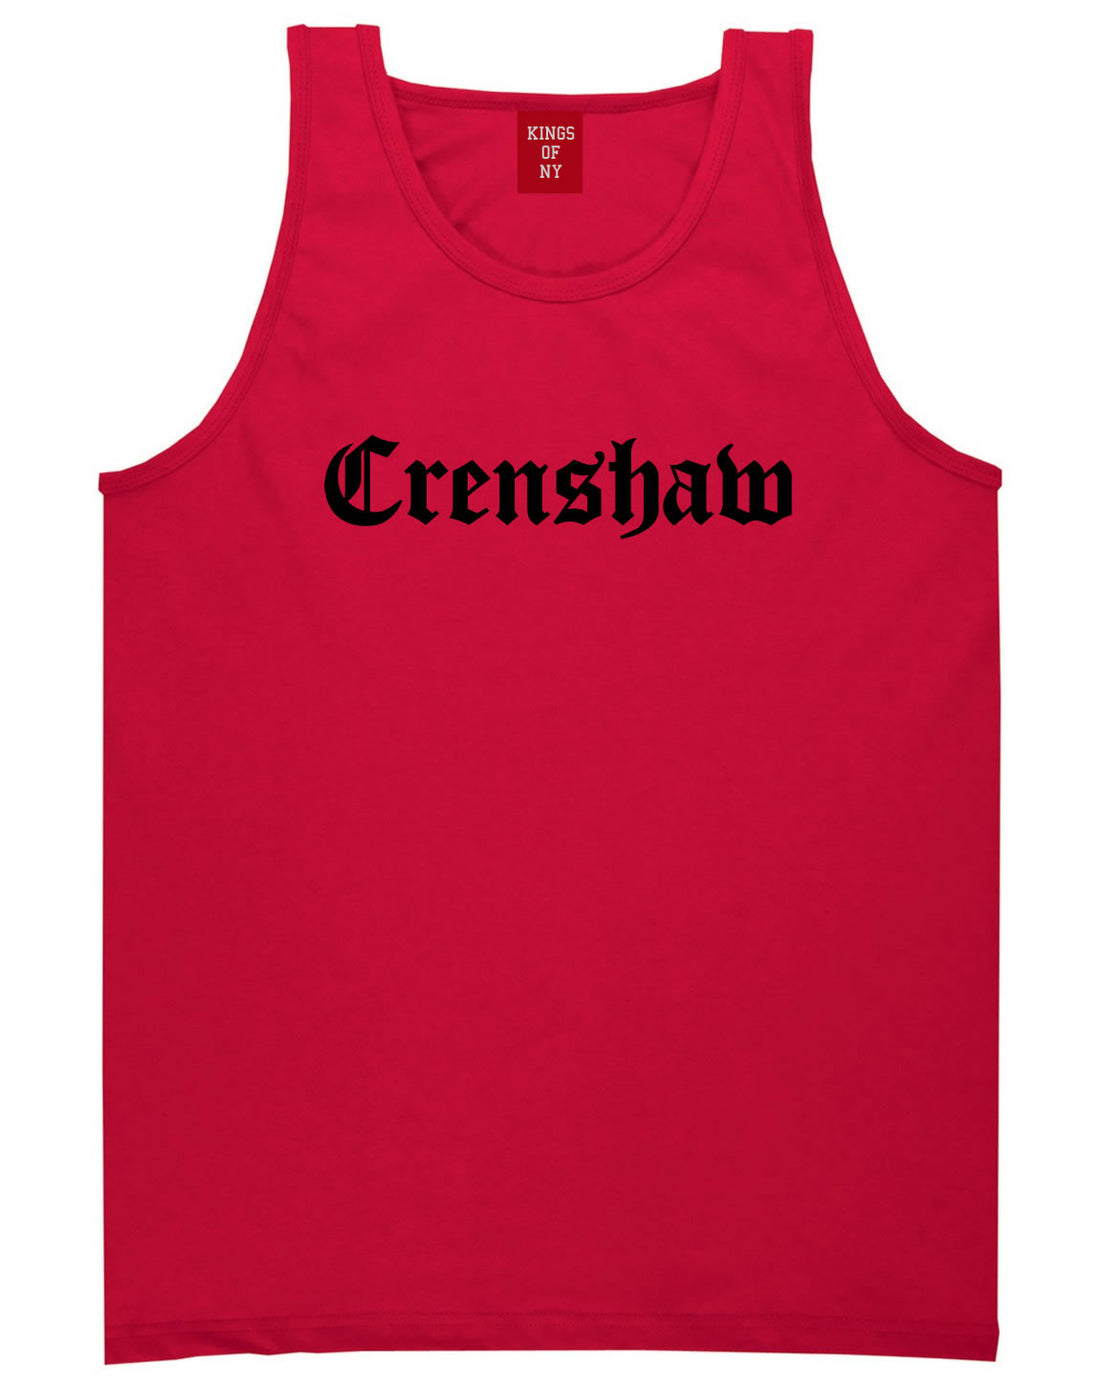 Crenshaw Old English California Tank Top in Red By Kings Of NY